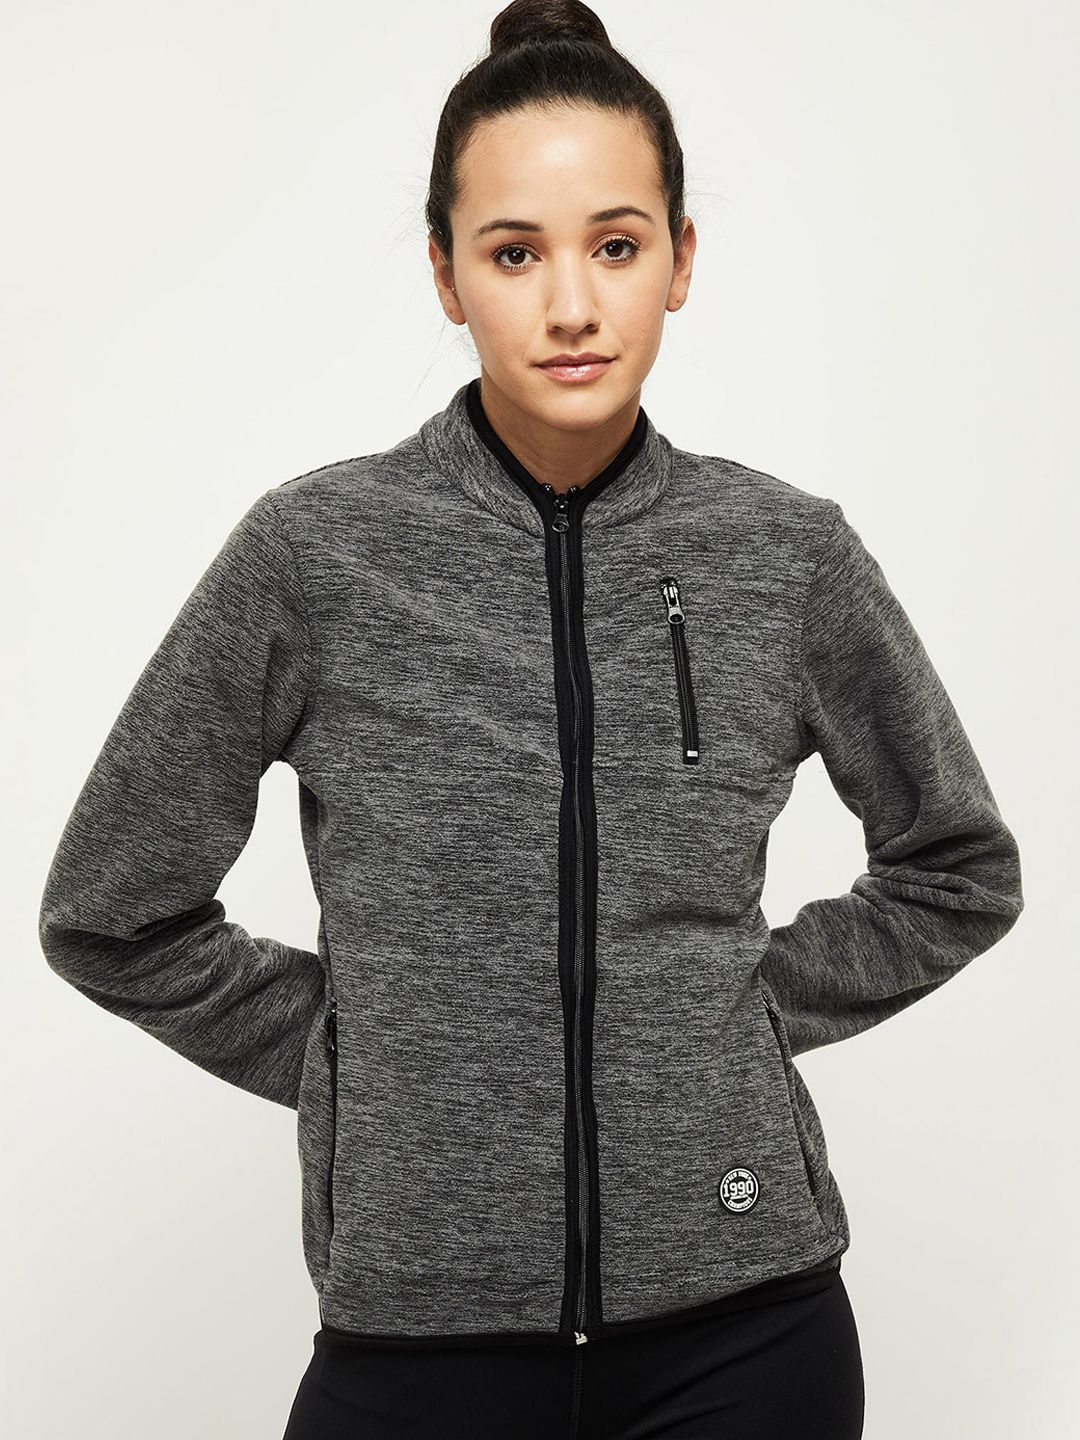 max Women Black Sporty Jacket Price in India